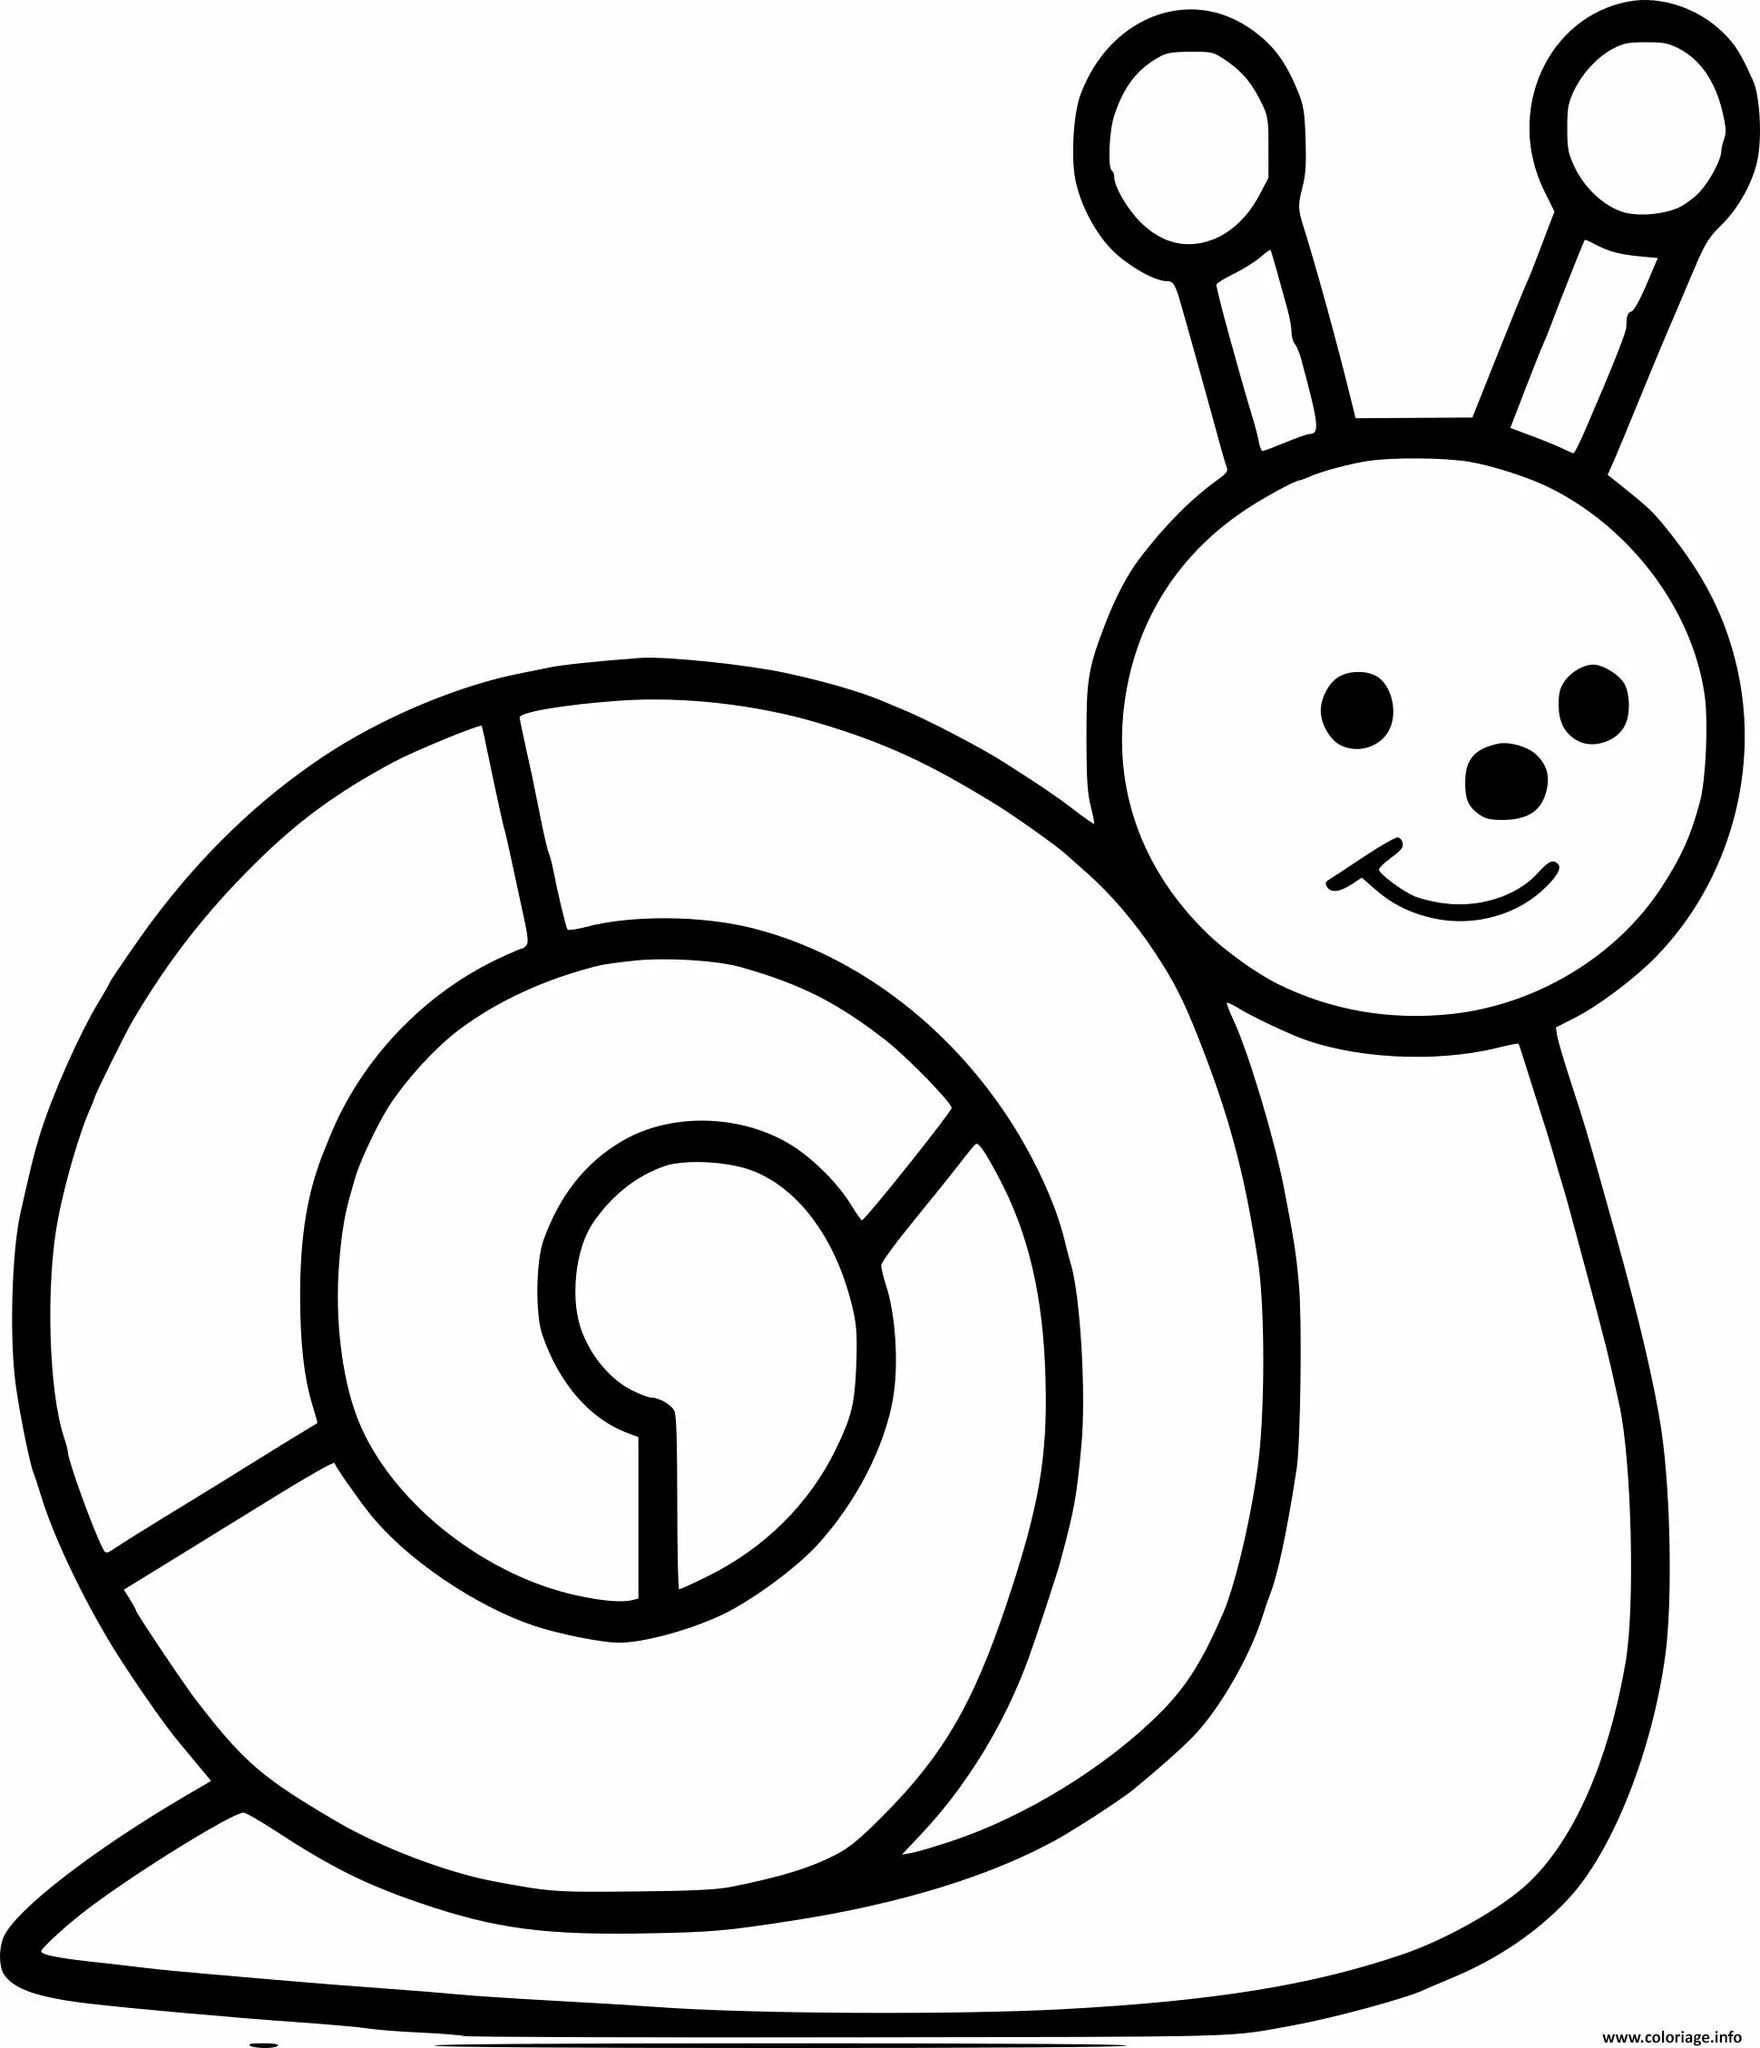 Snail for children 3 4 years old #4